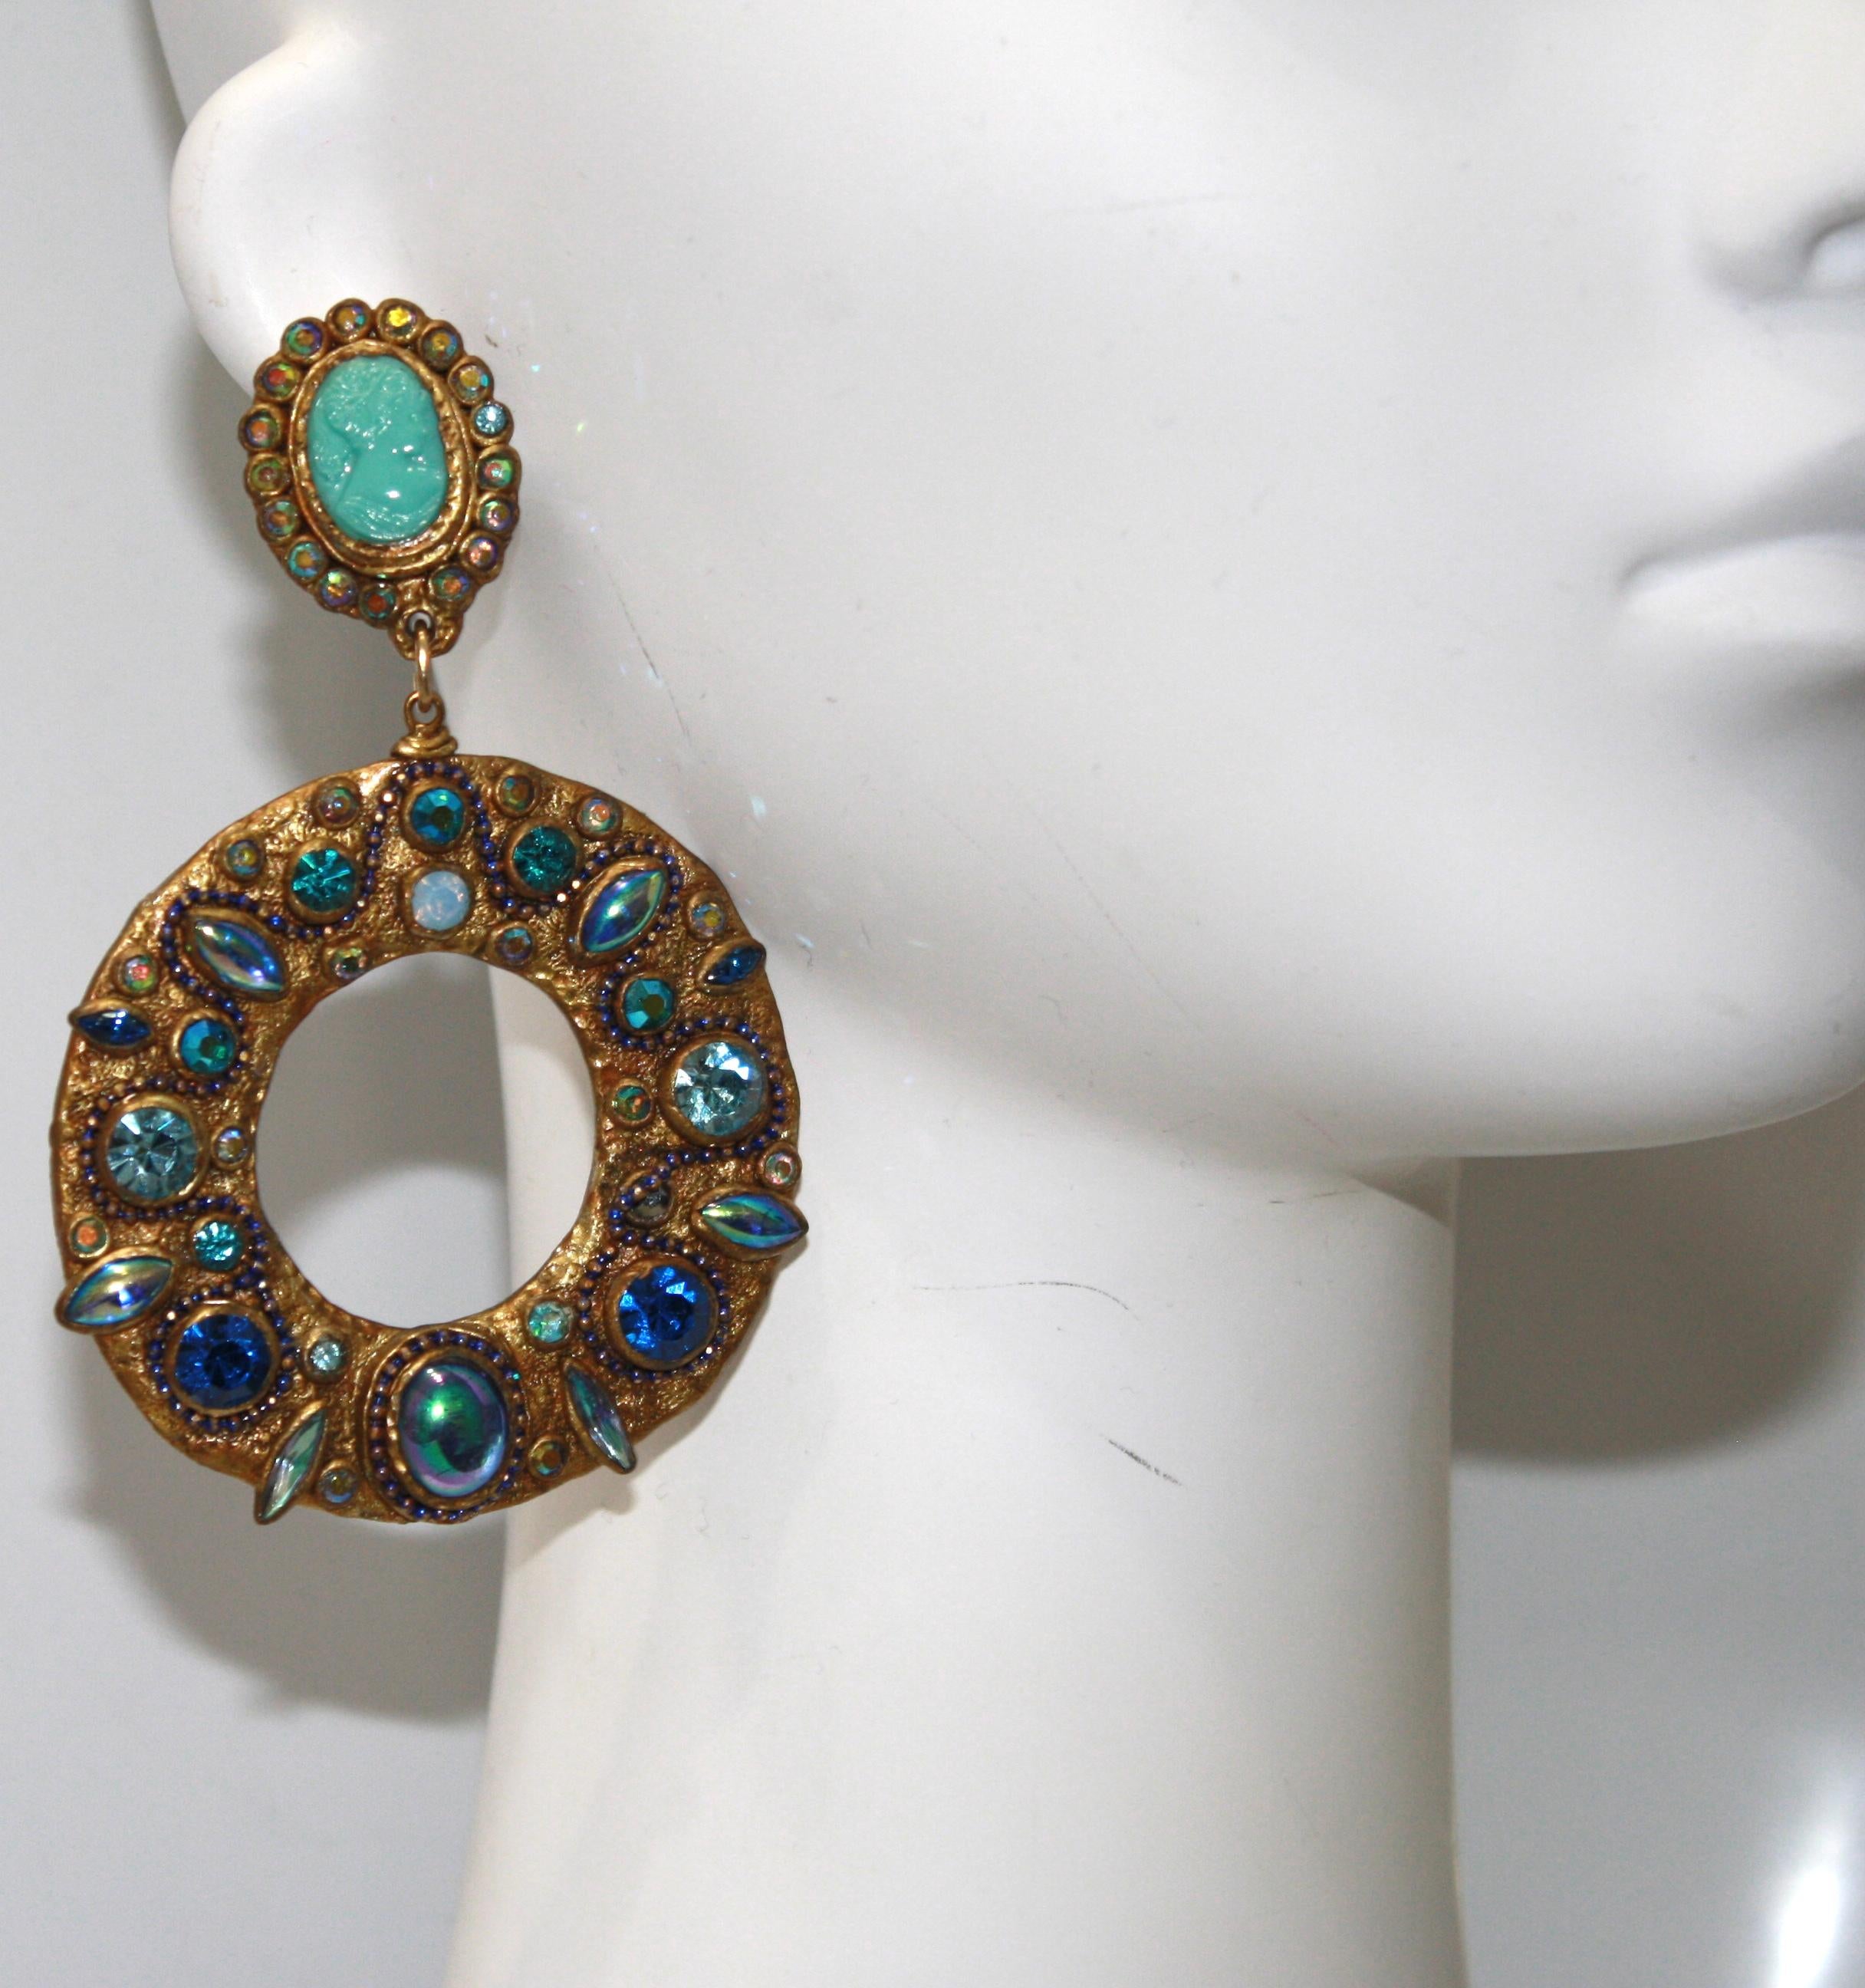 Large loops made of papier-mâché set with Swarovski crystal. Vintage turquoise cameo on clip.